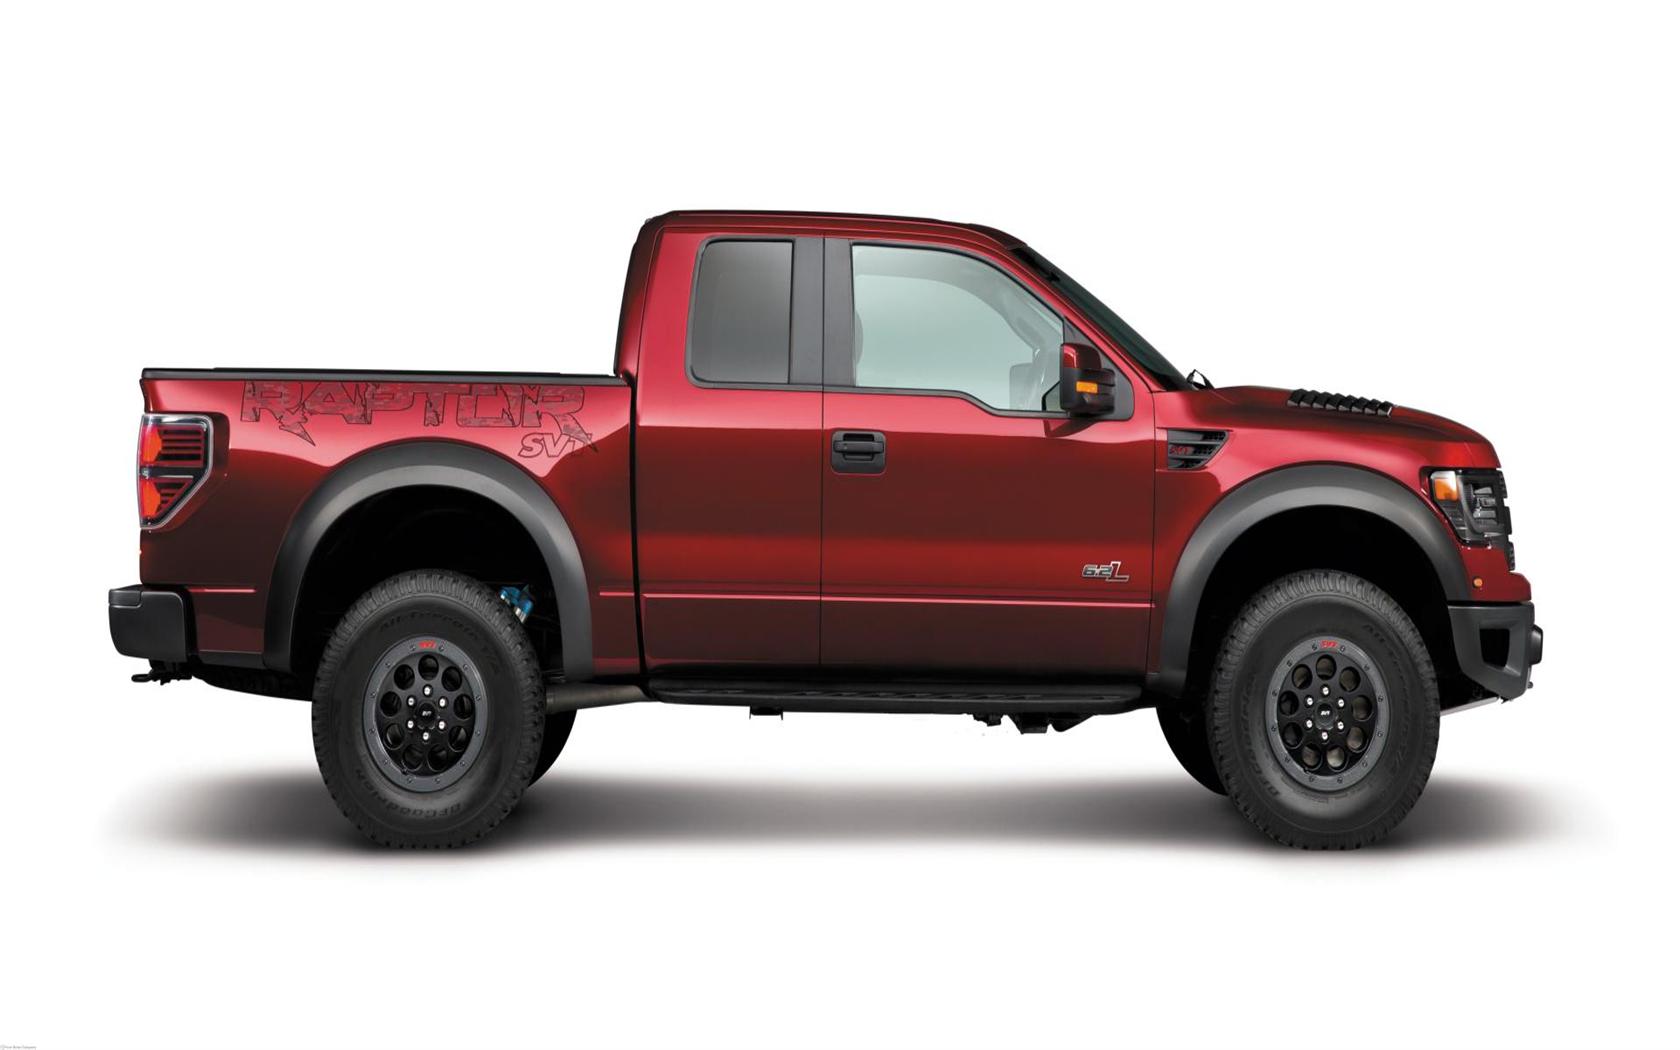 2014 Ford F 150 Svt Raptor Special Edition Image Photo 6 Of 7